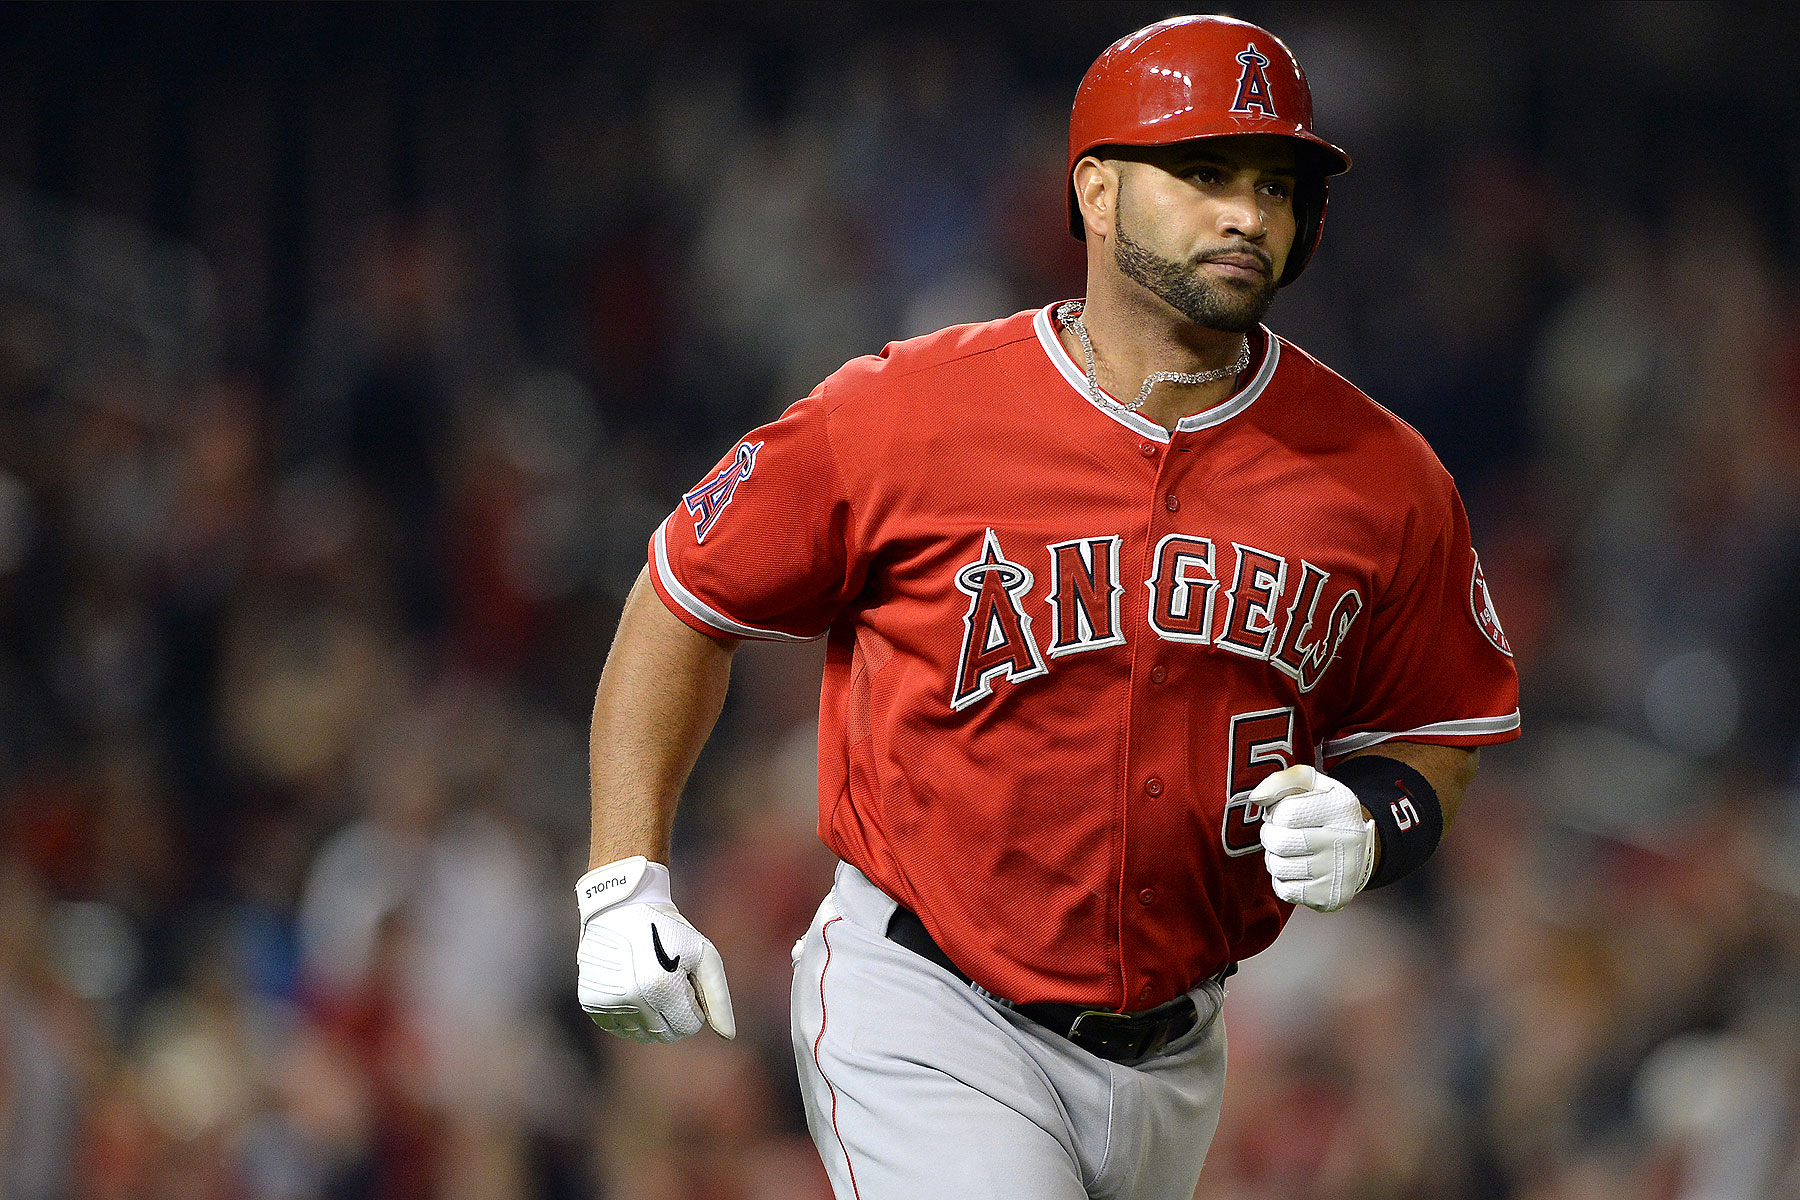 mlb-albert-pujols-enters-500-home-run-club-during-win-over-nationals-time